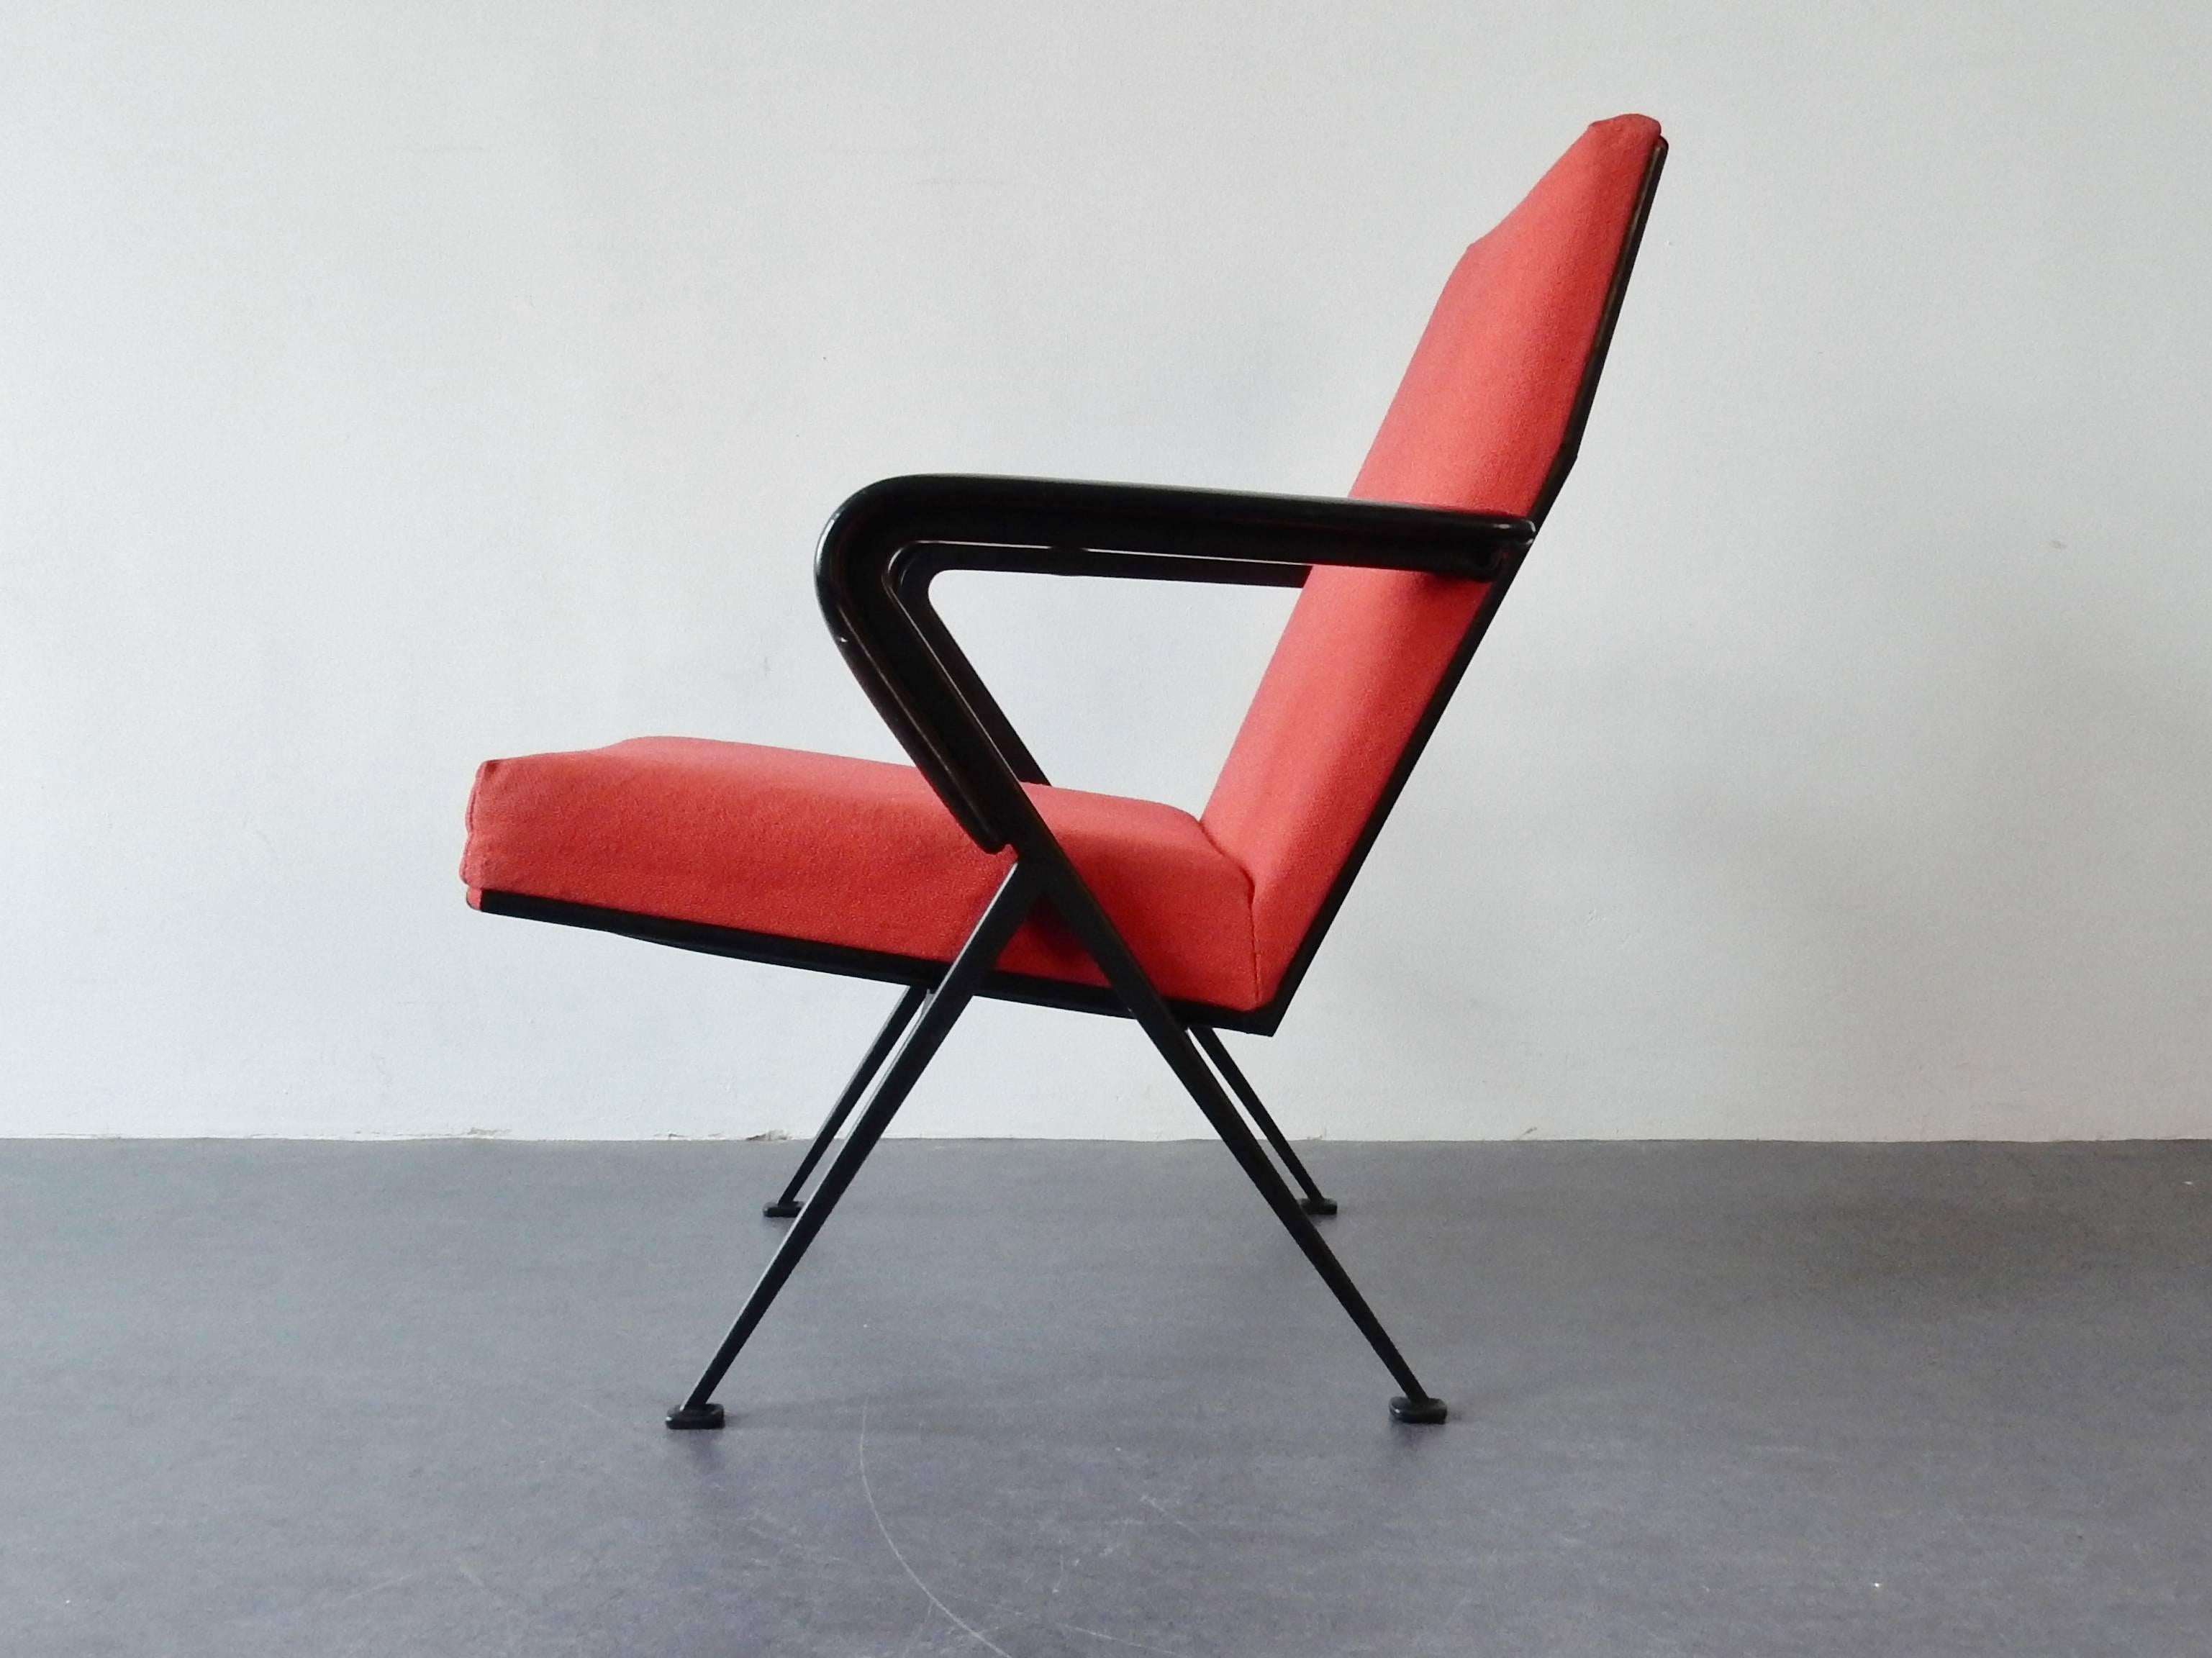 Lacquered Model 'Repose' Armchair by Friso Kramer for Ahrend de Cirkel, Netherlands, 1965 For Sale